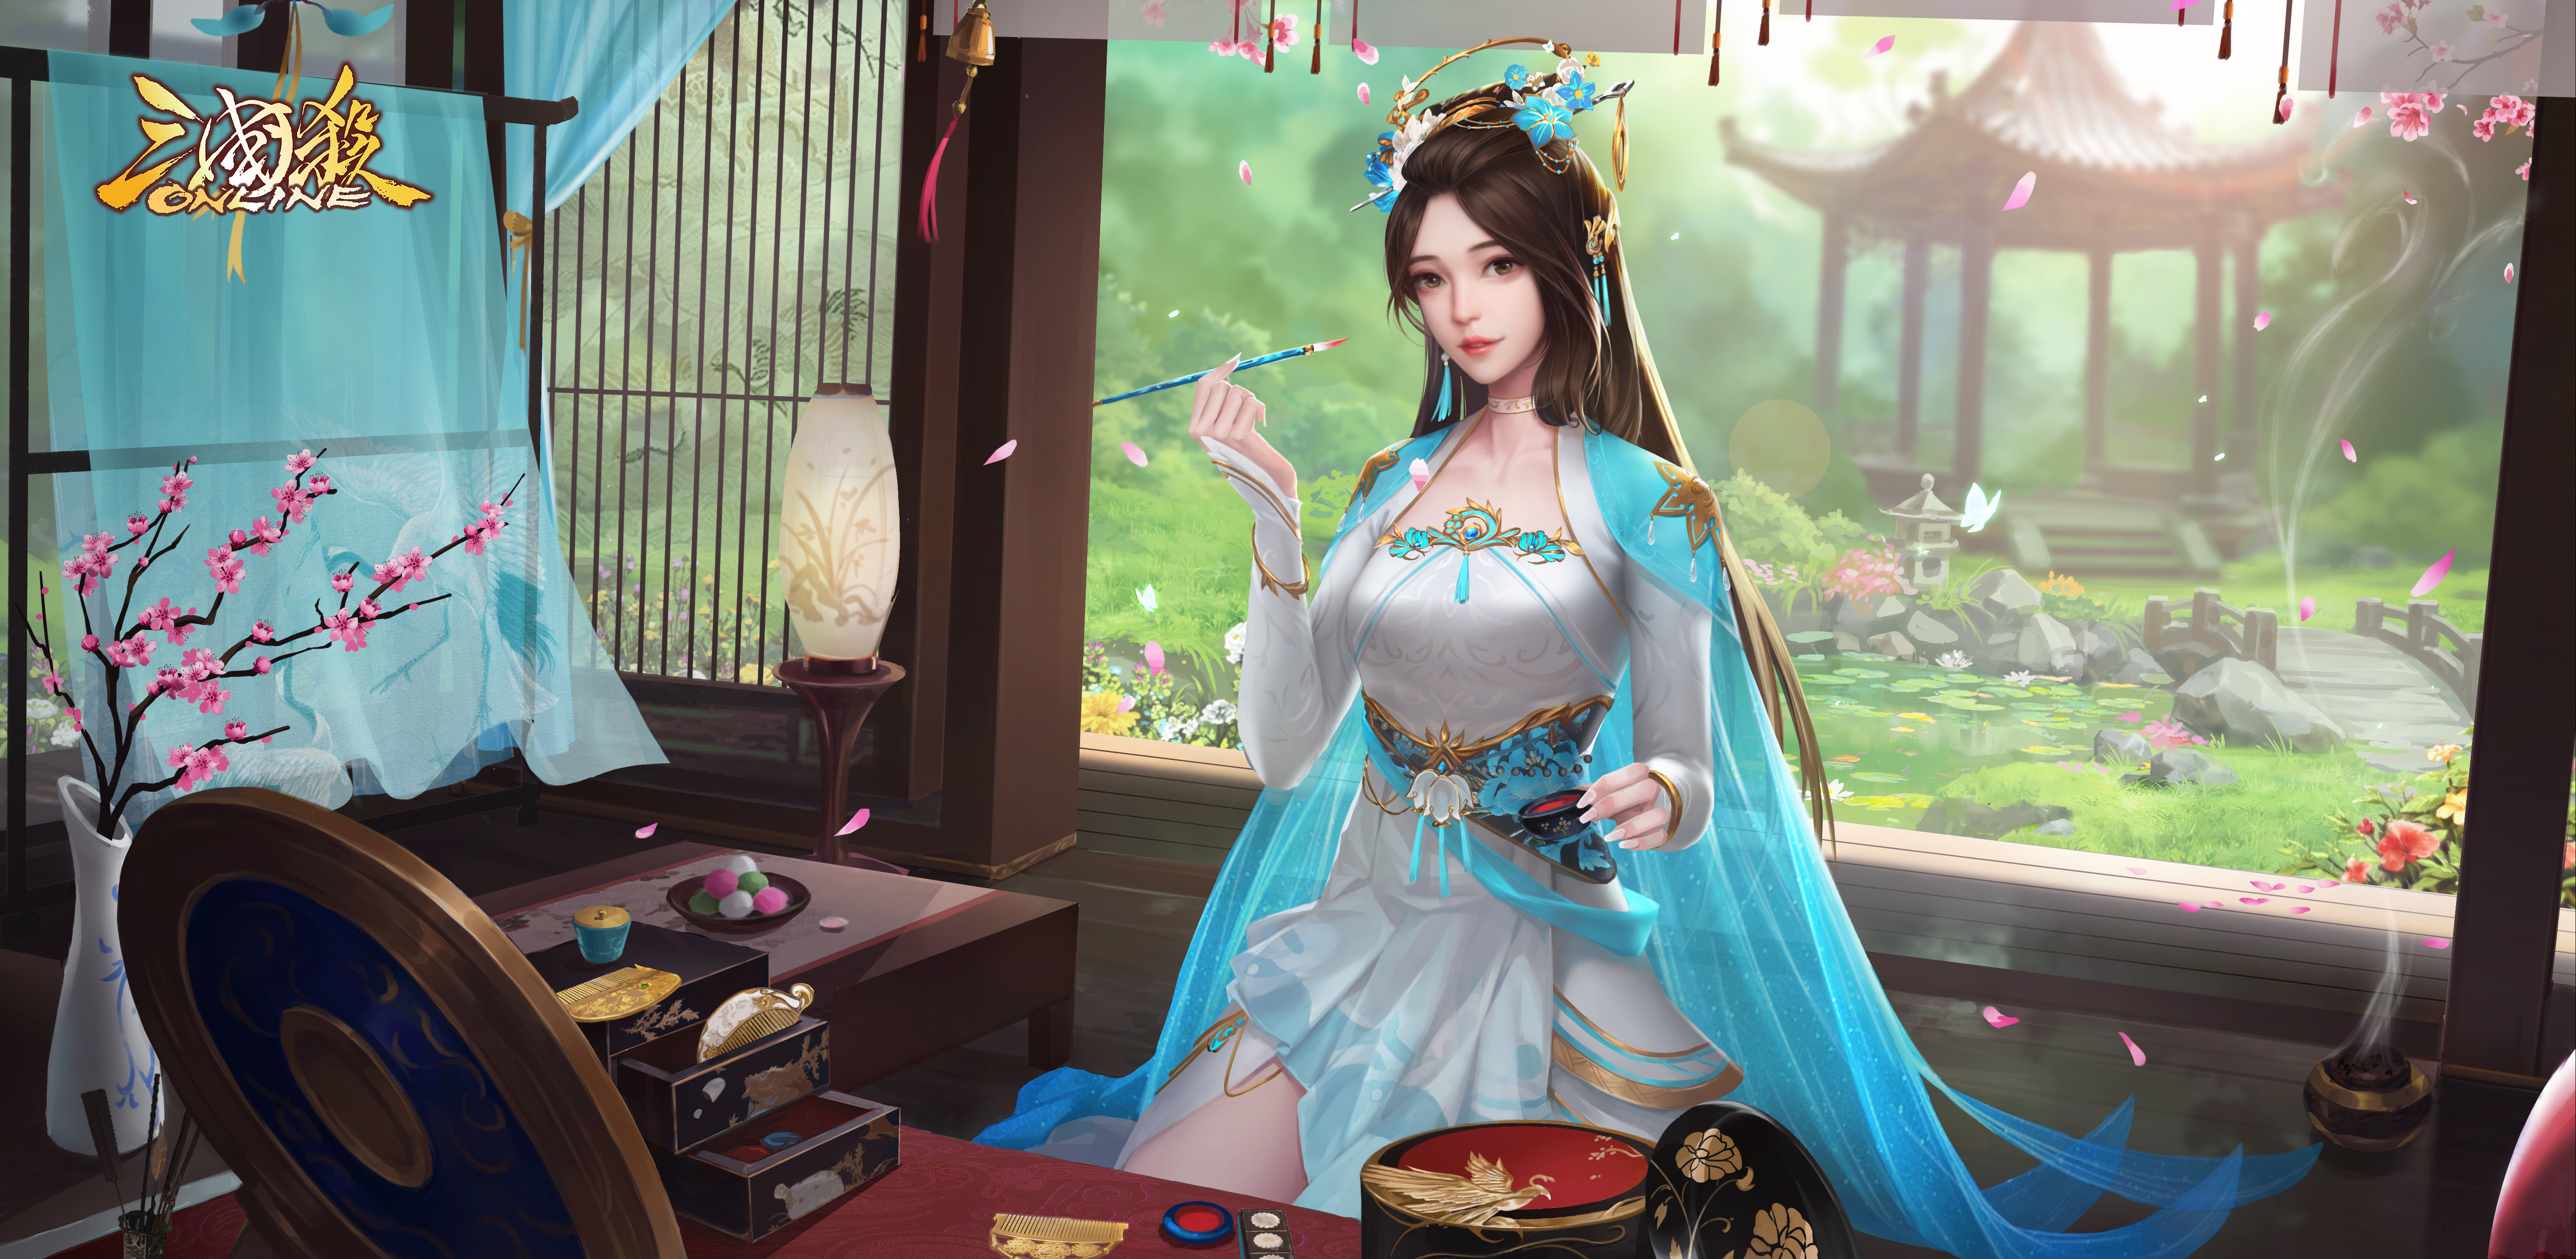 Three Kingdoms Video Game Characters Video Games Video Game Art Video Game Girls Petals Flowers Smok 5779x2824